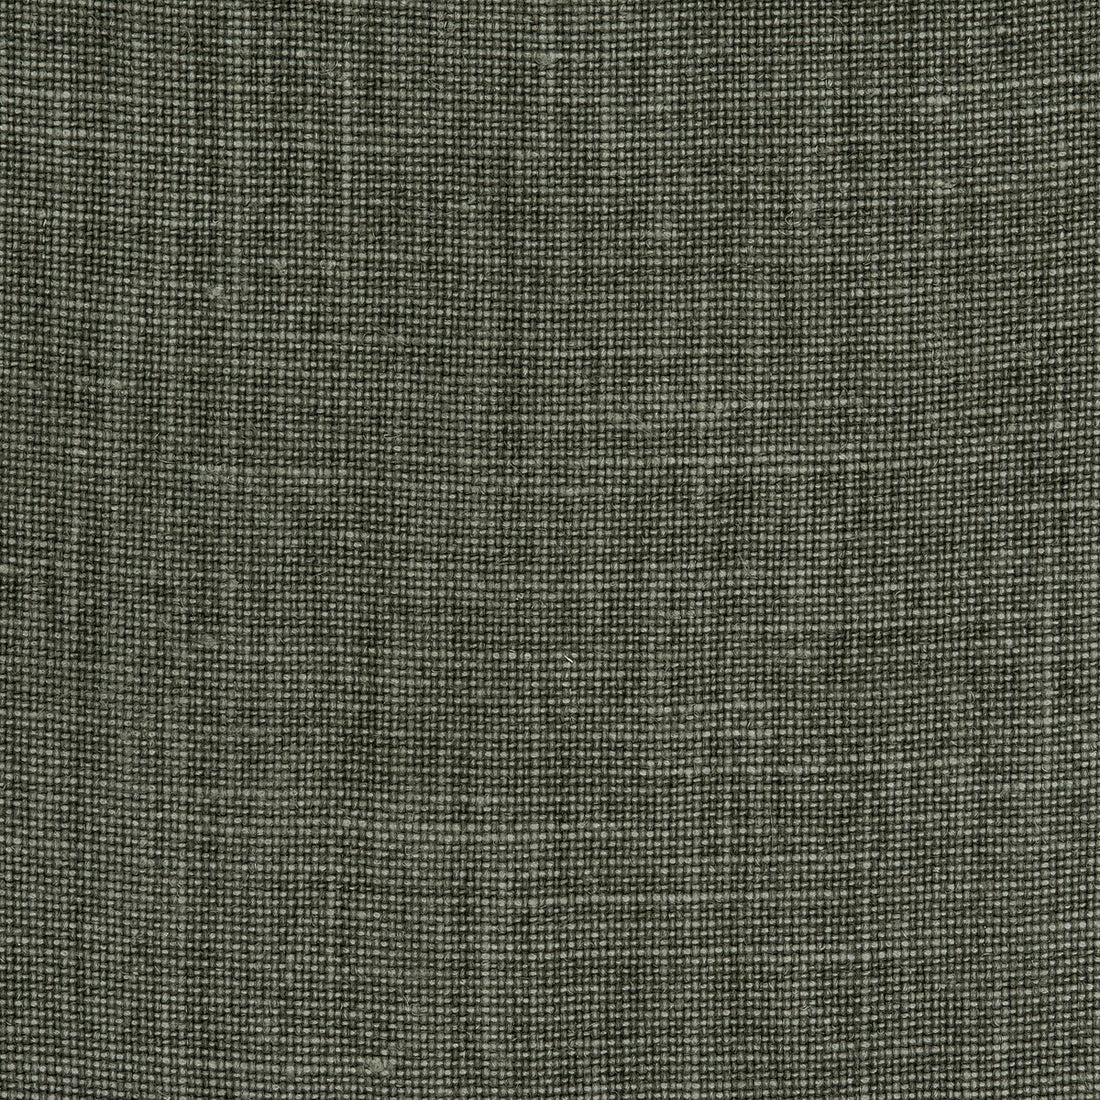 Weathered Linen fabric in forest color - pattern BF10962.794.0 - by G P &amp; J Baker in the Baker House Linens collection